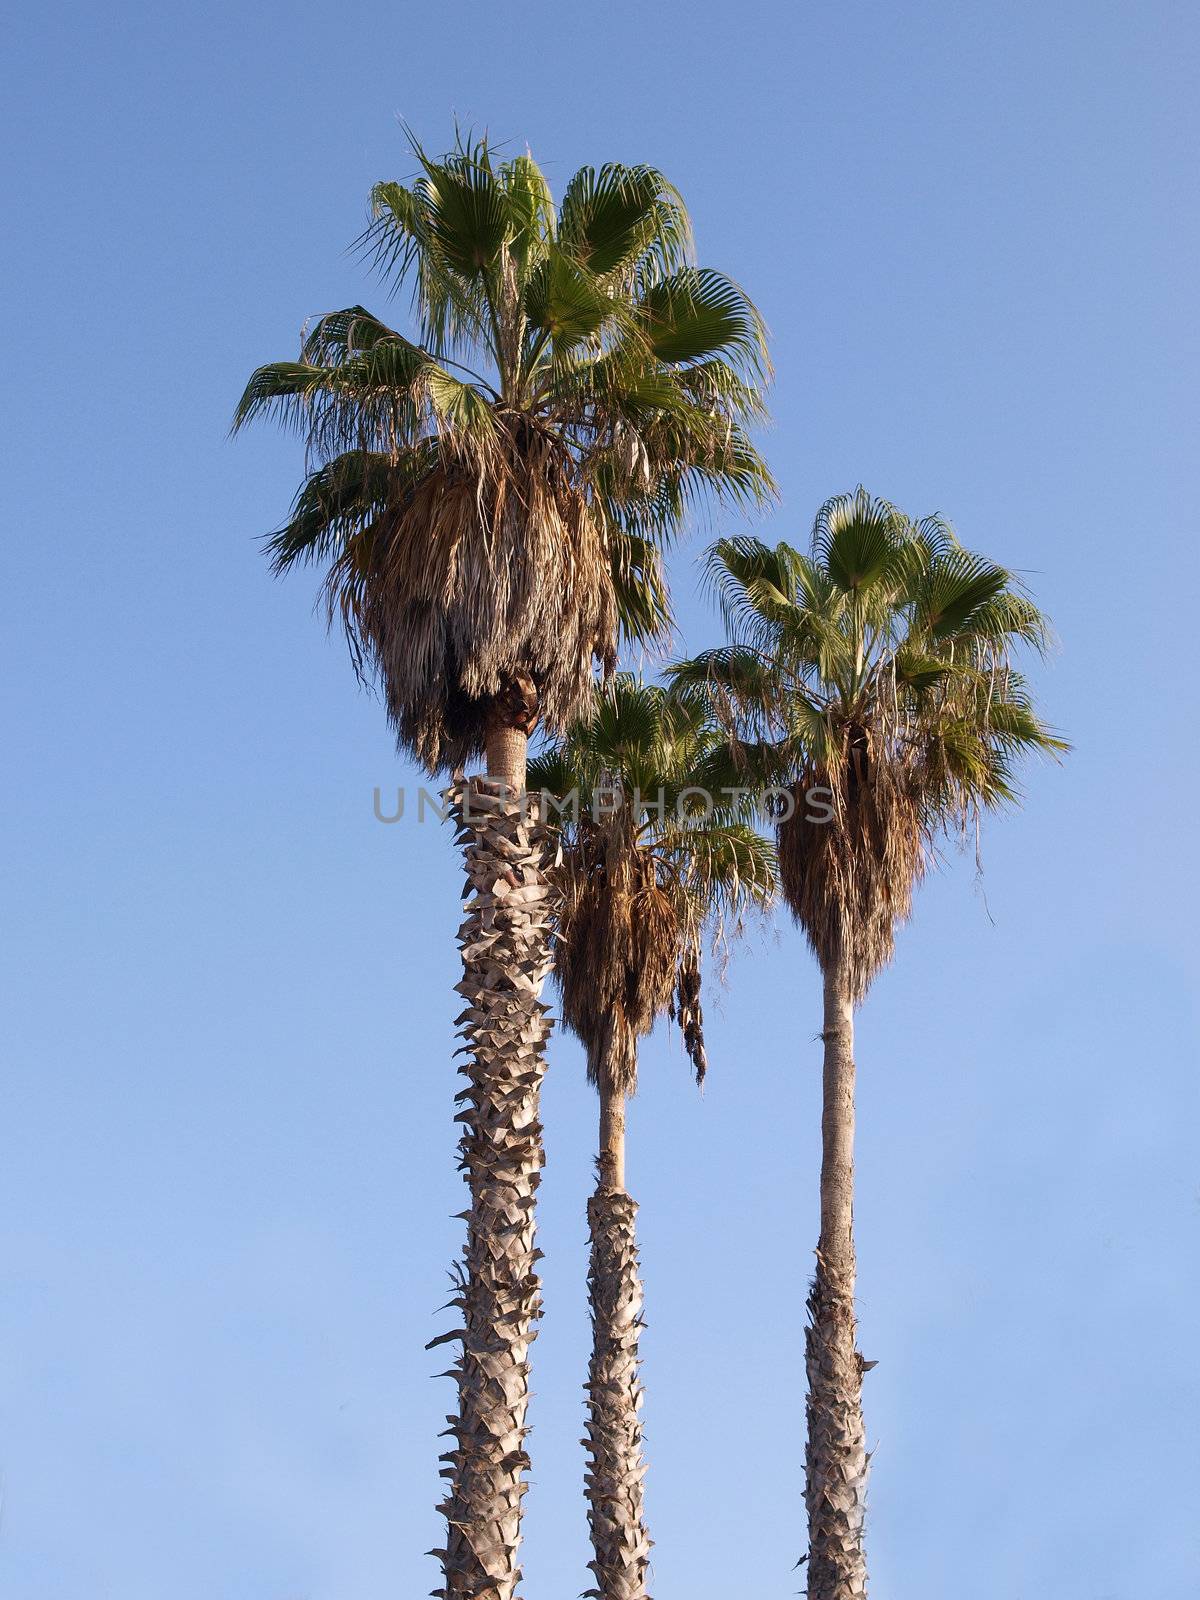 Tall beautiful palm trees by Ronyzmbow